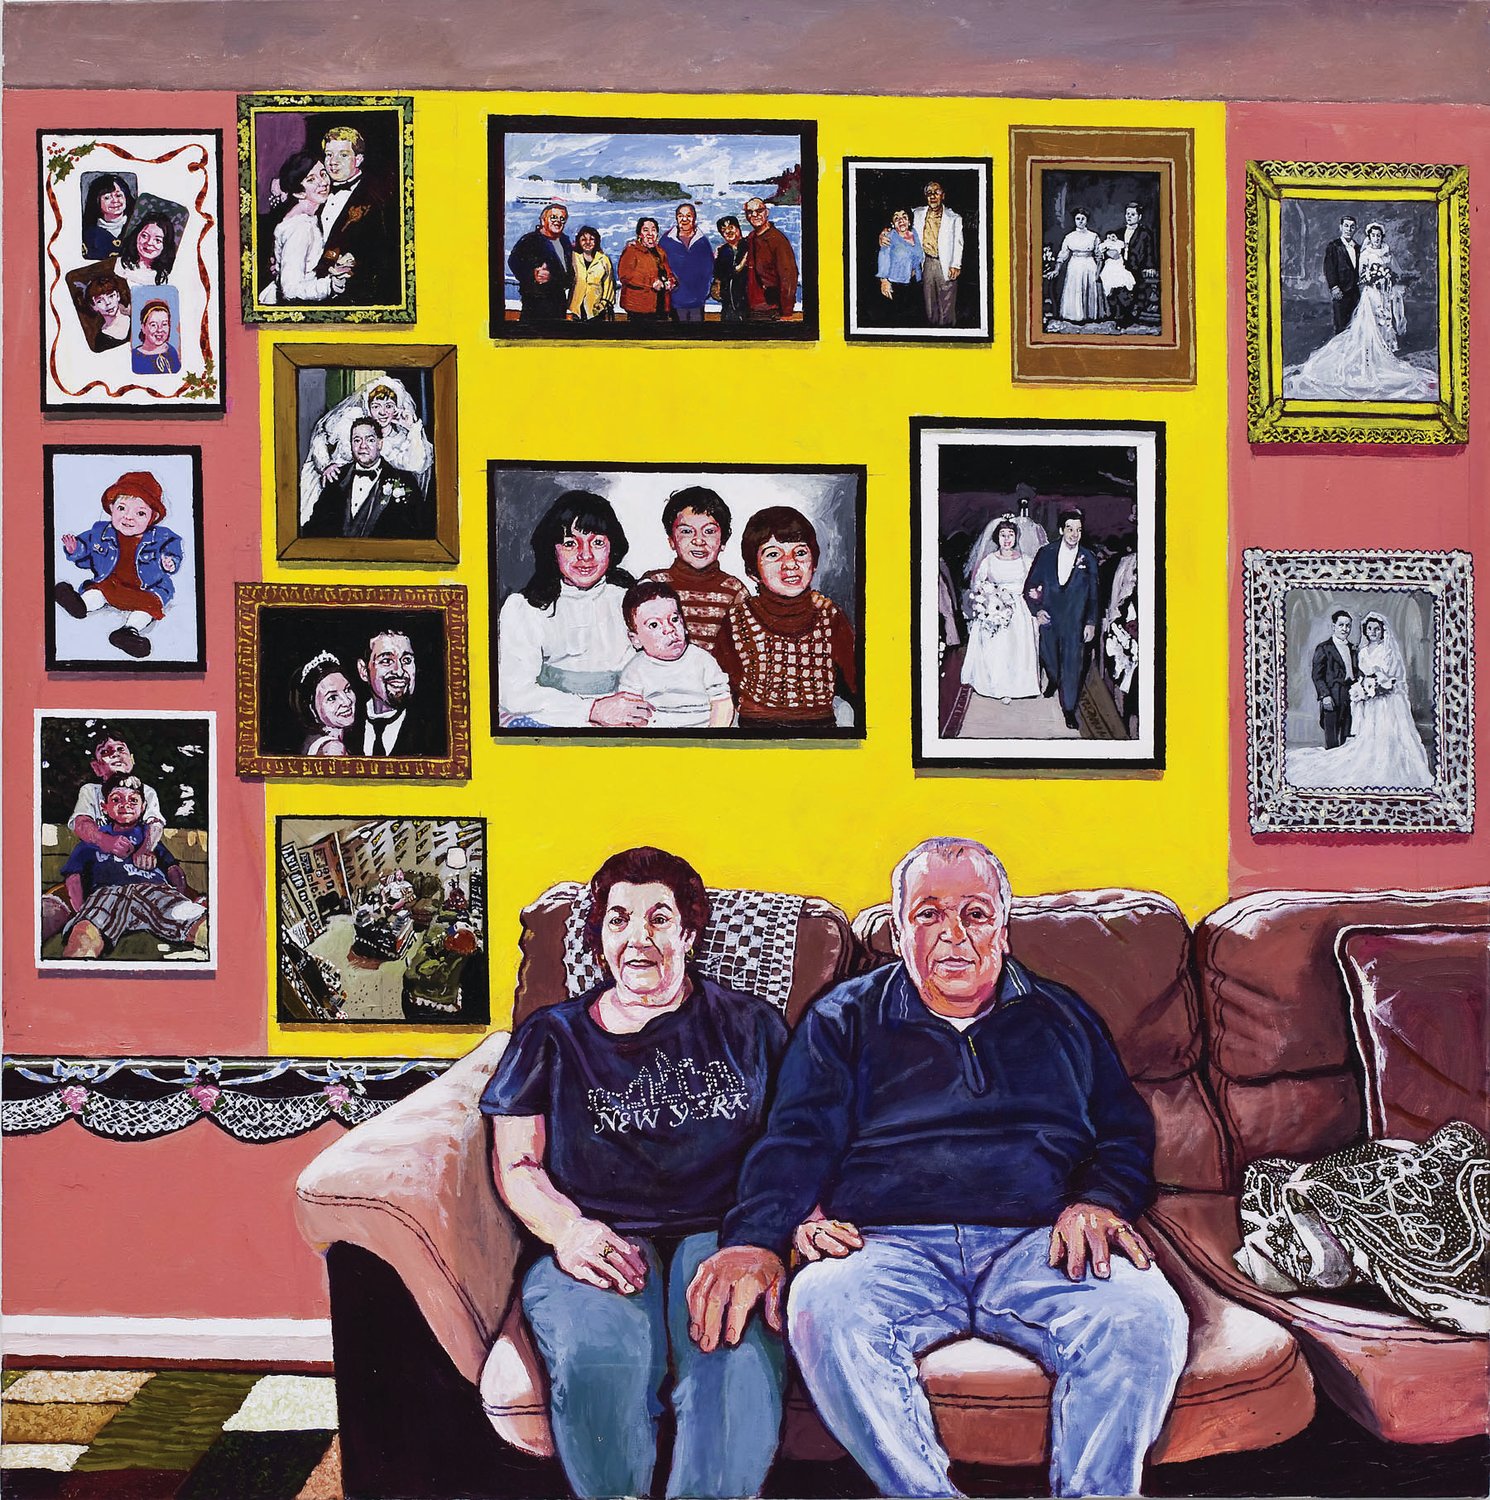 “Portrait of a Family” is one of the paintings included in the exhibit “Mel Leipzig: Octogenarian” at the Rider University Art Gallery.